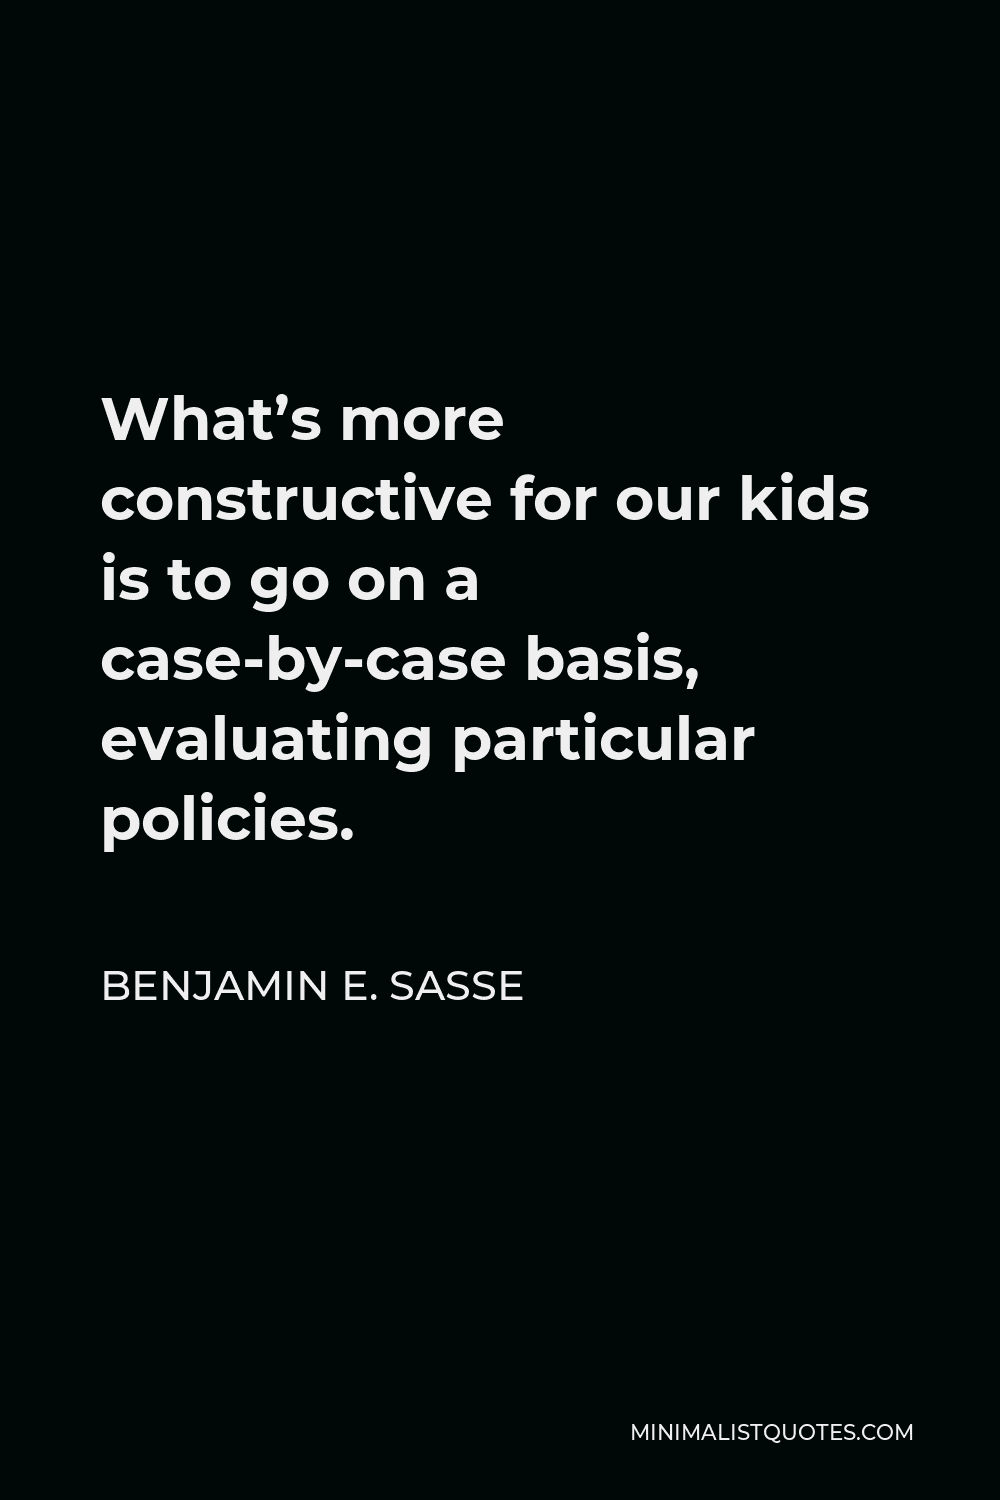 Benjamin E. Sasse Quote - What’s more constructive for our kids is to go on a case-by-case basis, evaluating particular policies.